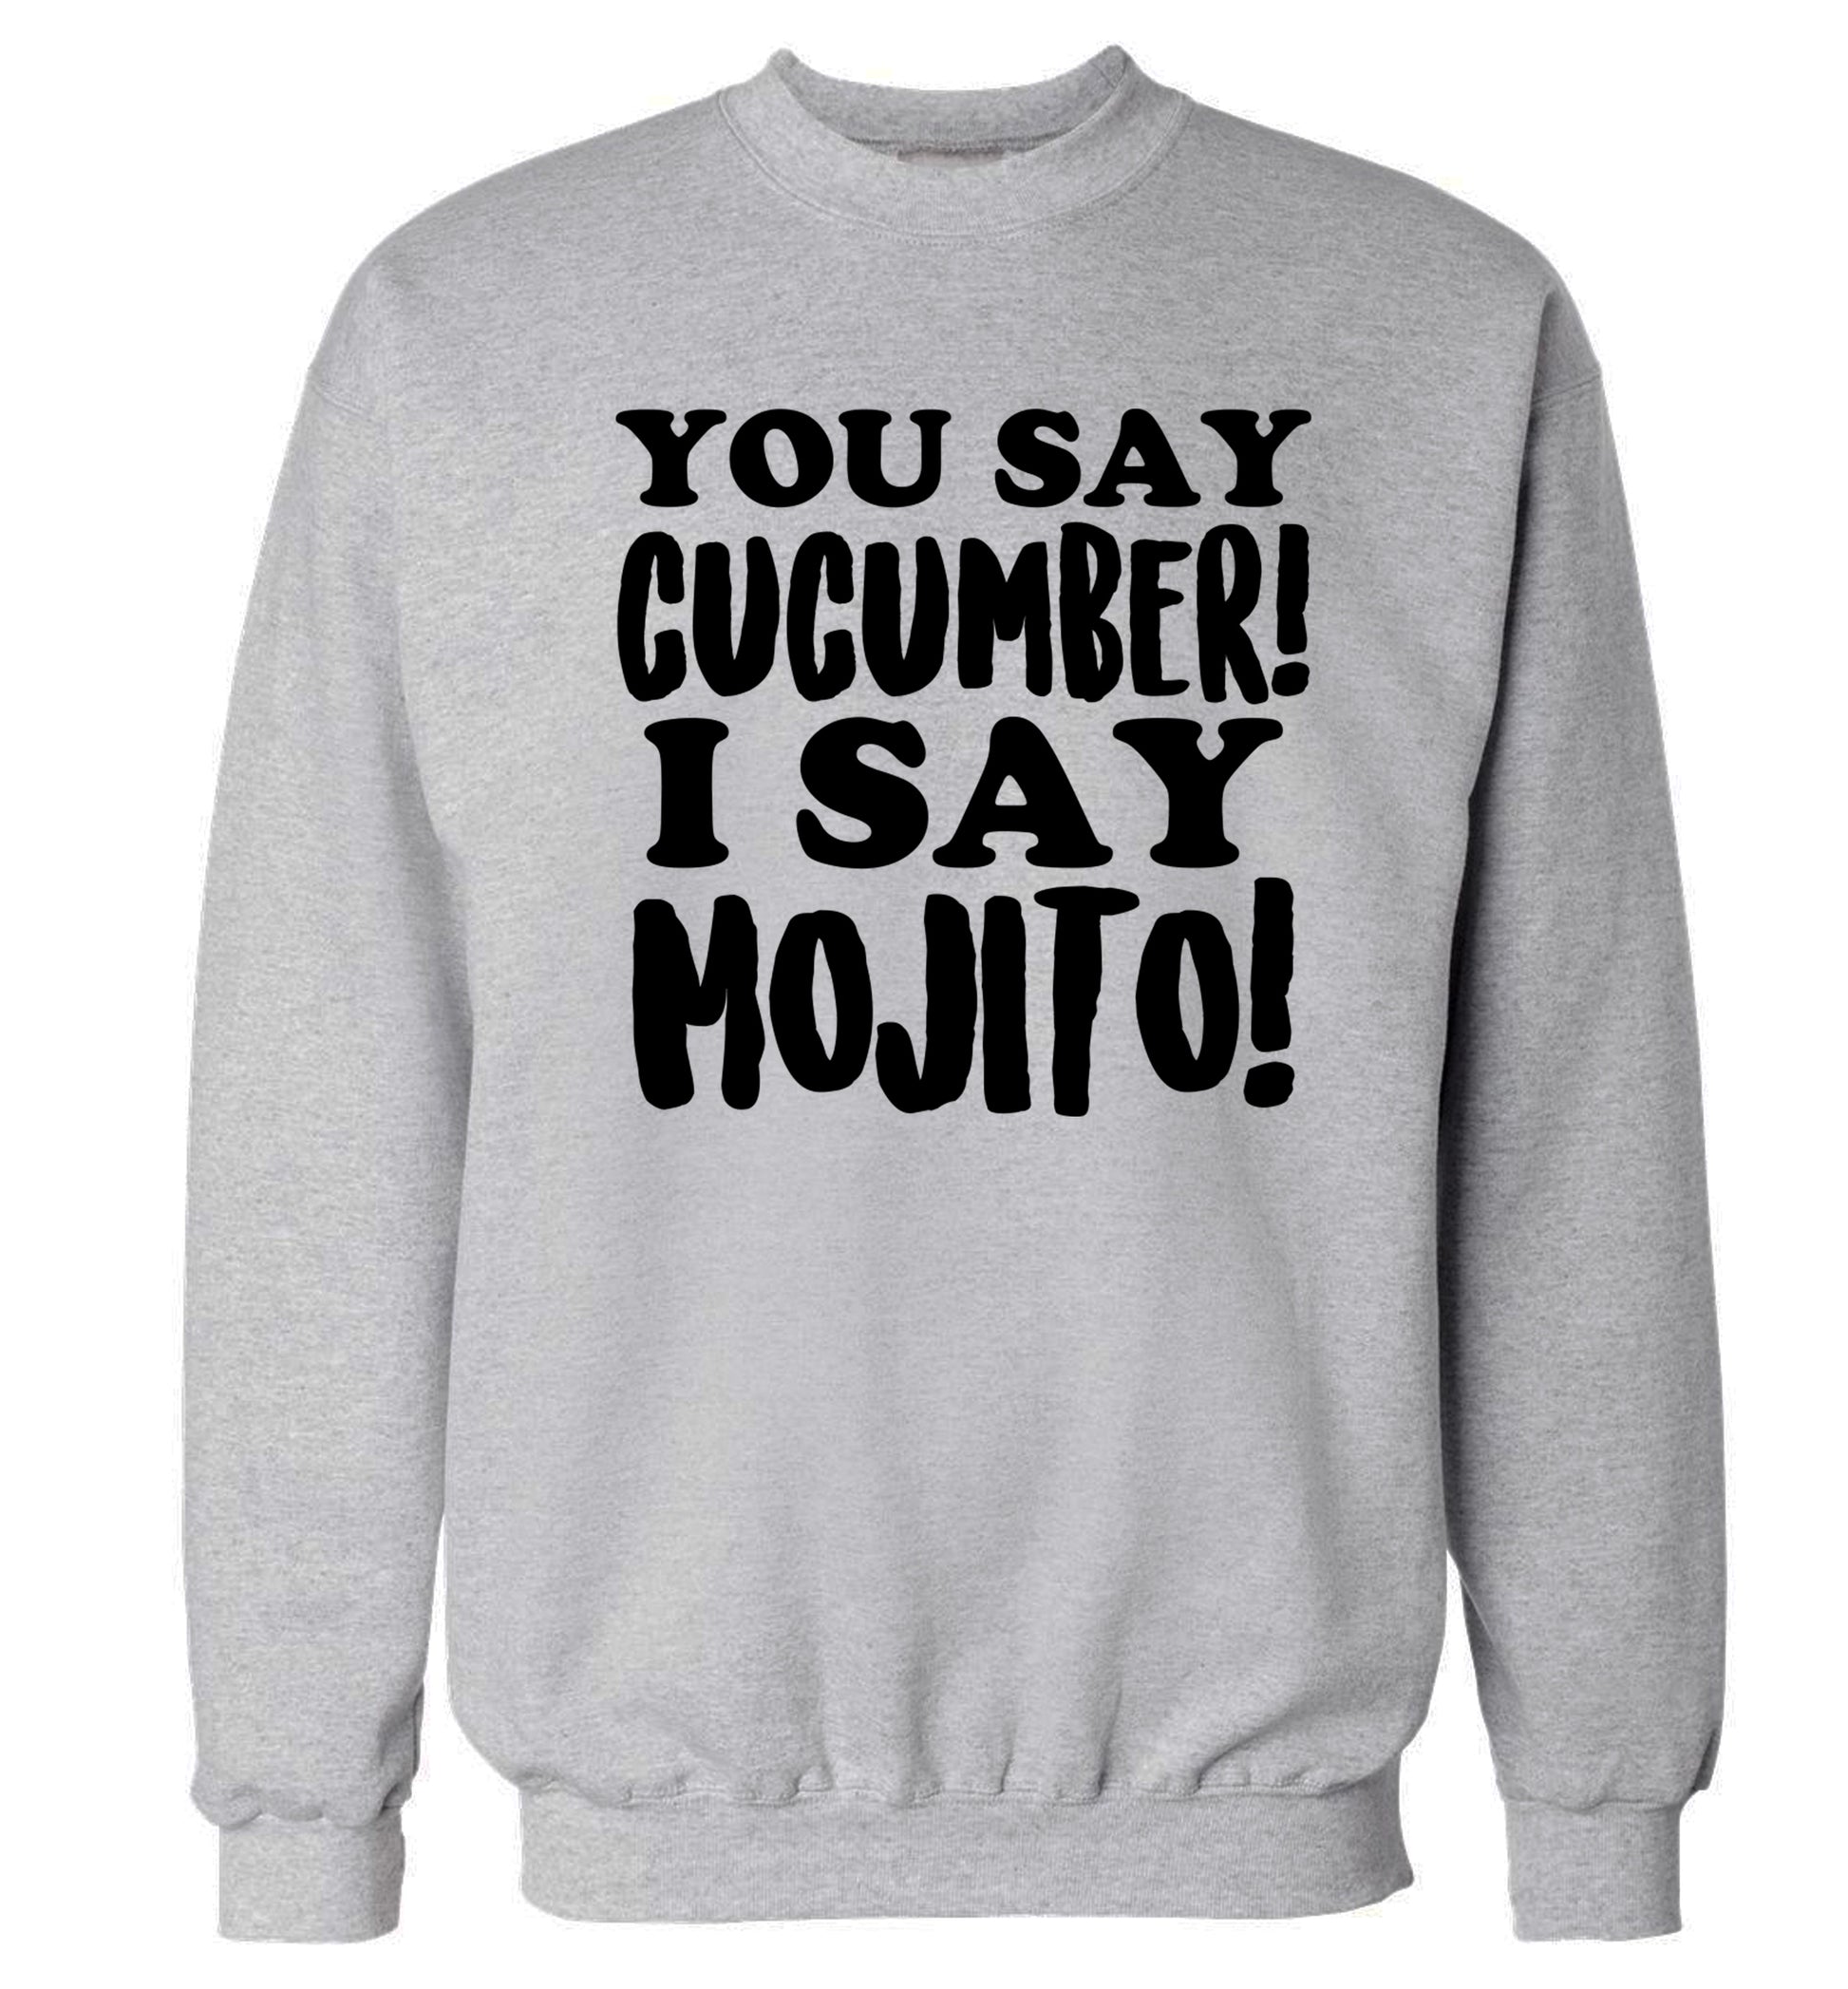 You say cucumber I say mojito! Adult's unisex grey Sweater 2XL